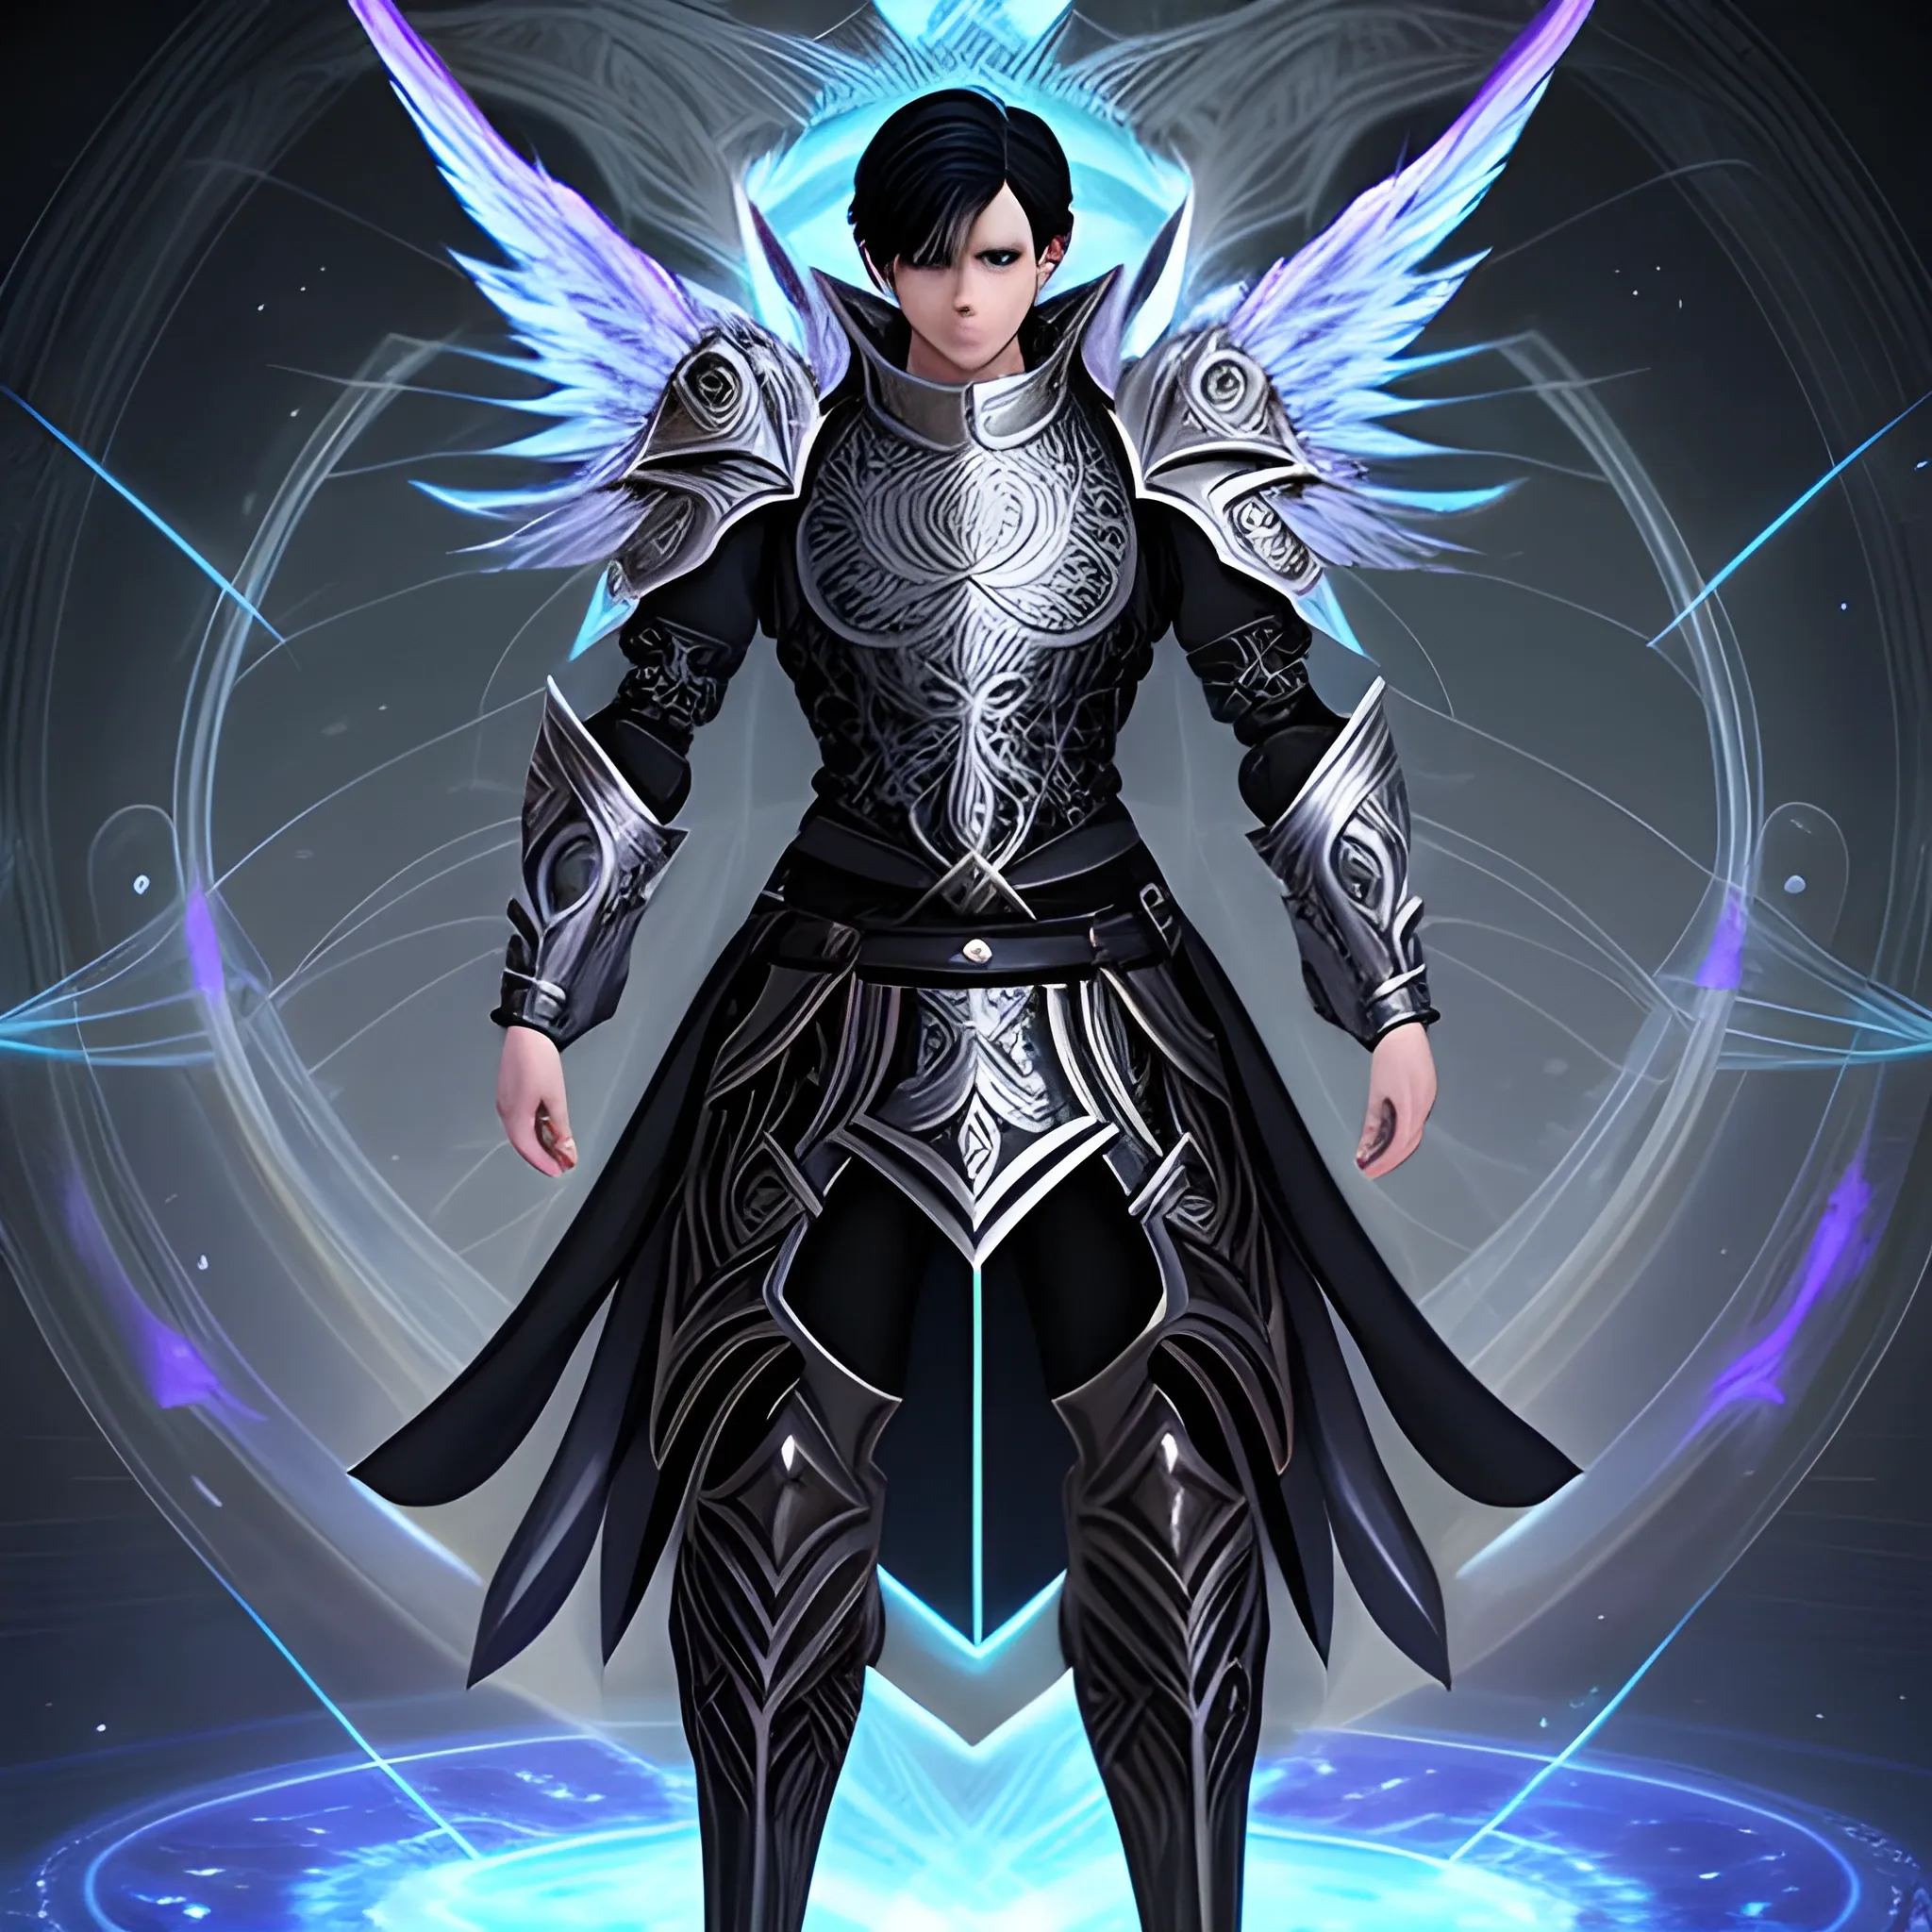 black haired male aasimar in light armor
, Trippy